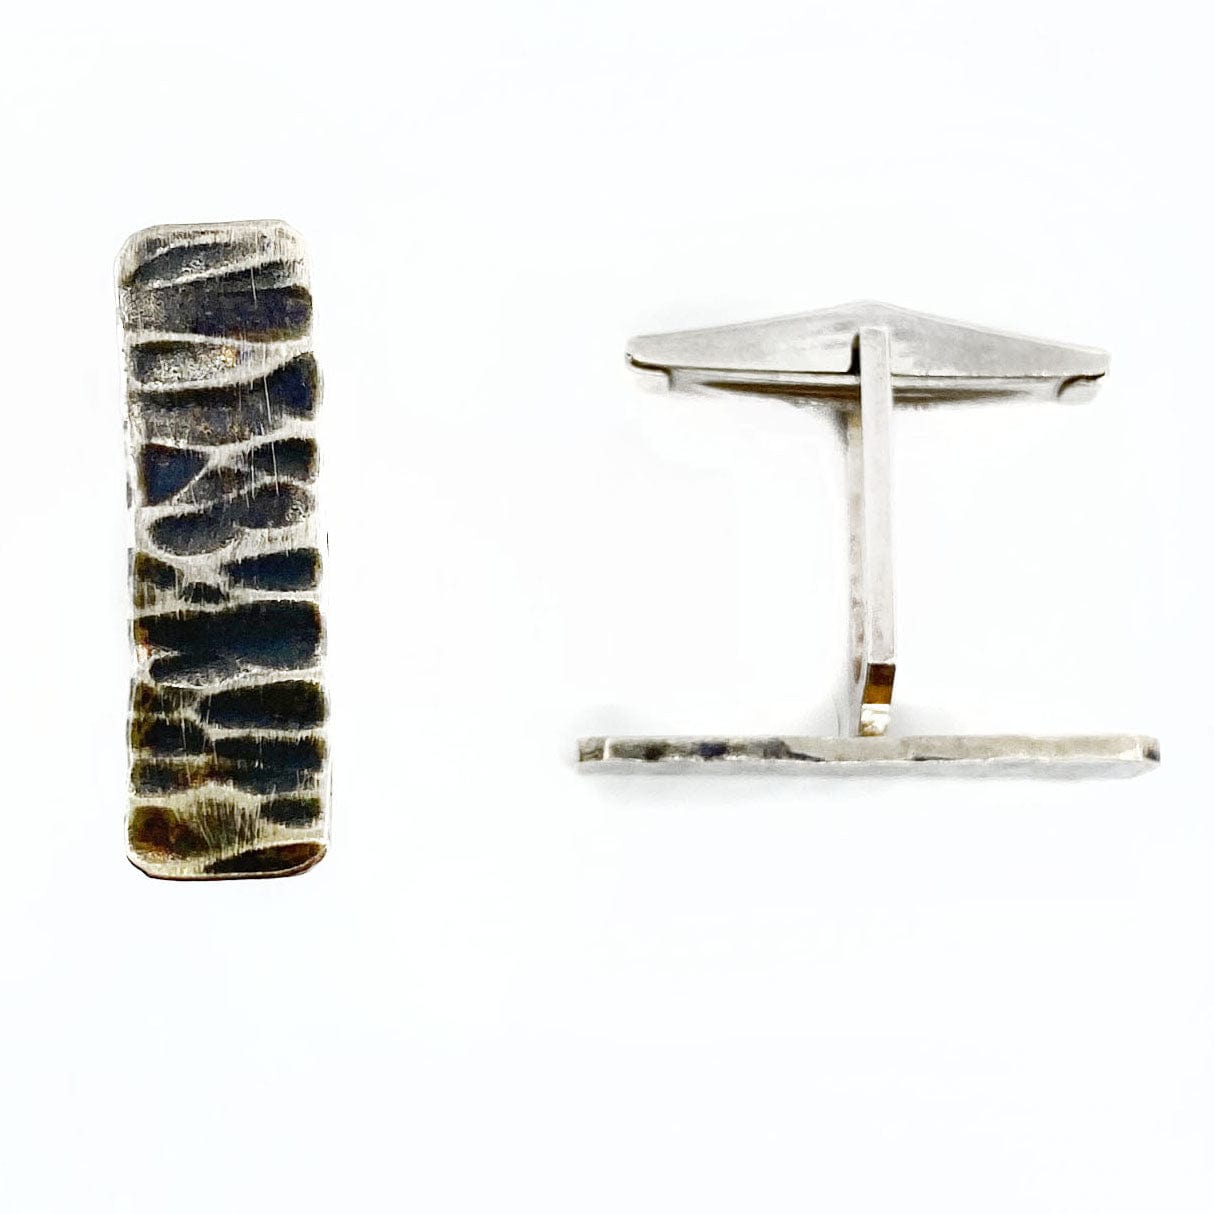 Rough and Tumble Silver Cuff Links